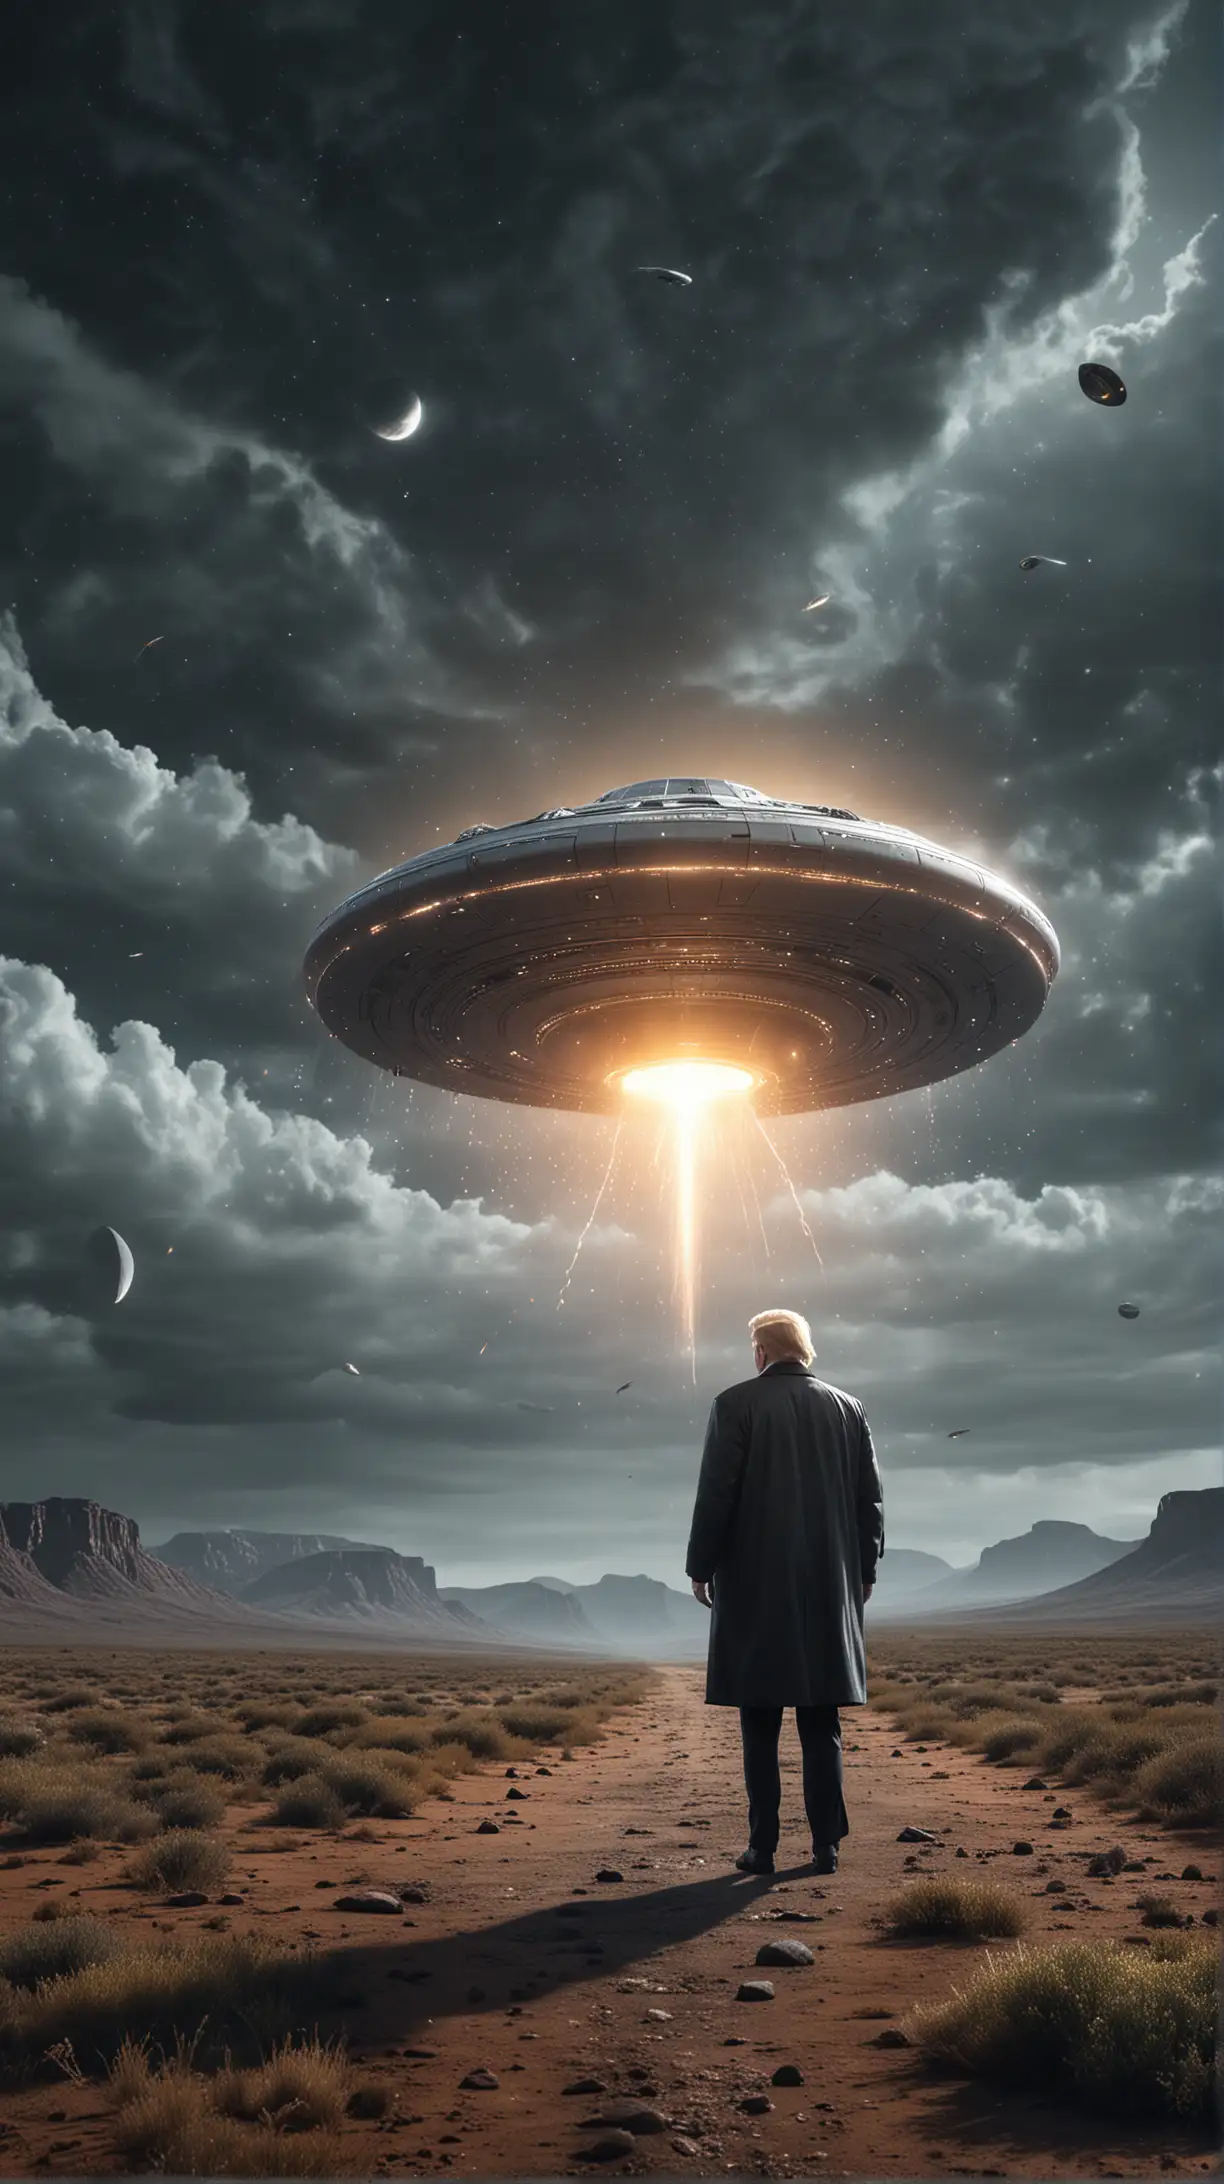 mystical UFO Encounter Digital Art illustrating Brazel, Donald Trump Ultra realistic with long jacket on , stumbling upon remainings of a UFO. Creating a scene with an air of mystery and discovery, Inspirations from Sci-Fi Art, Medium Shot, Quantum Wavetracing Render, Moody Lighting